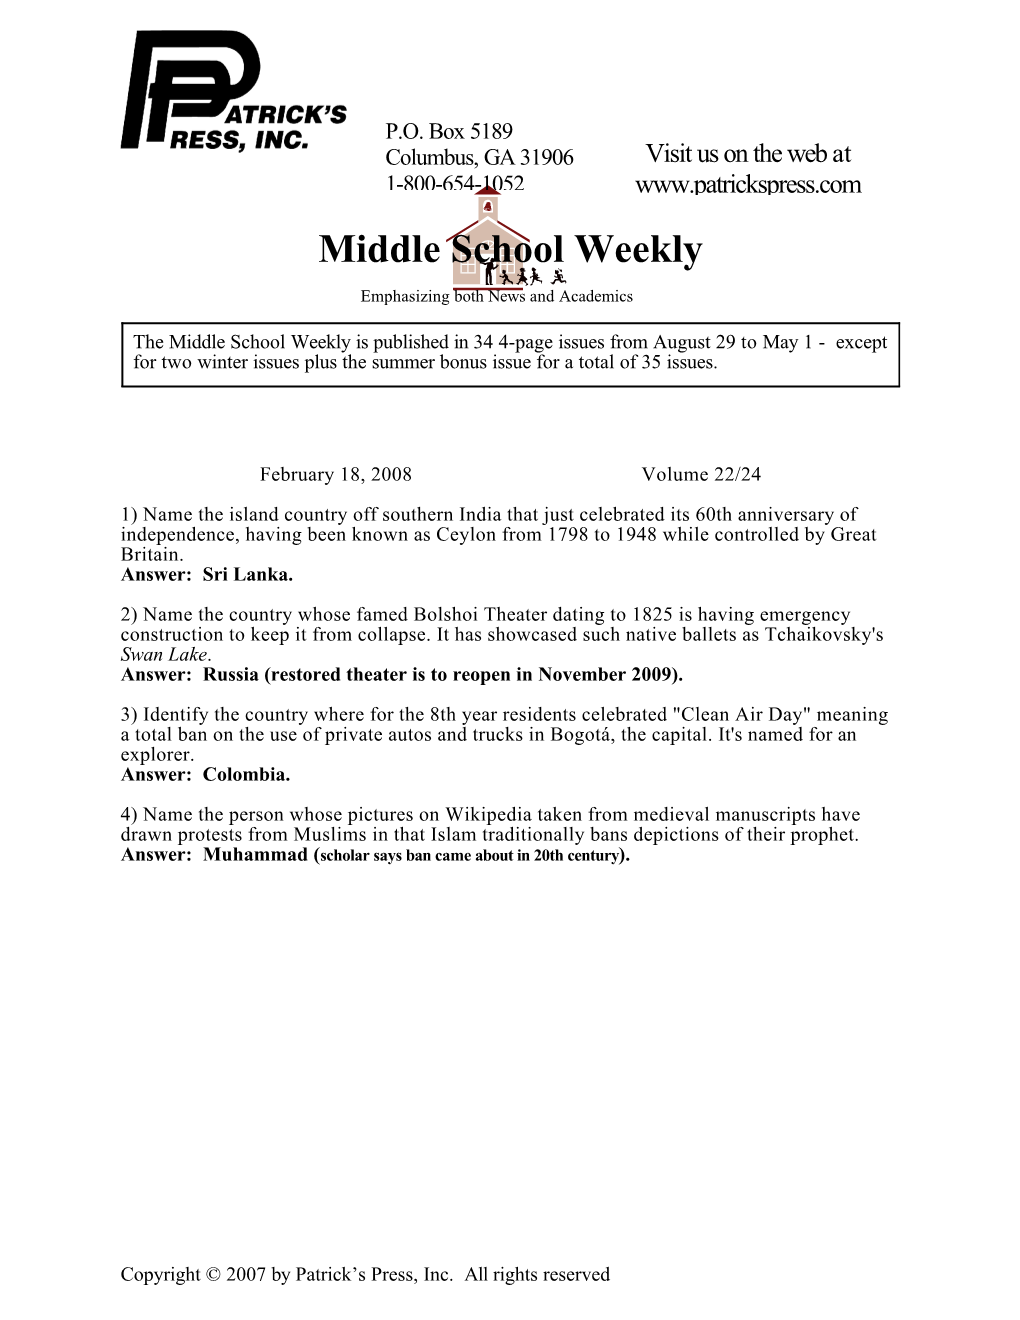 Middle School Weekly